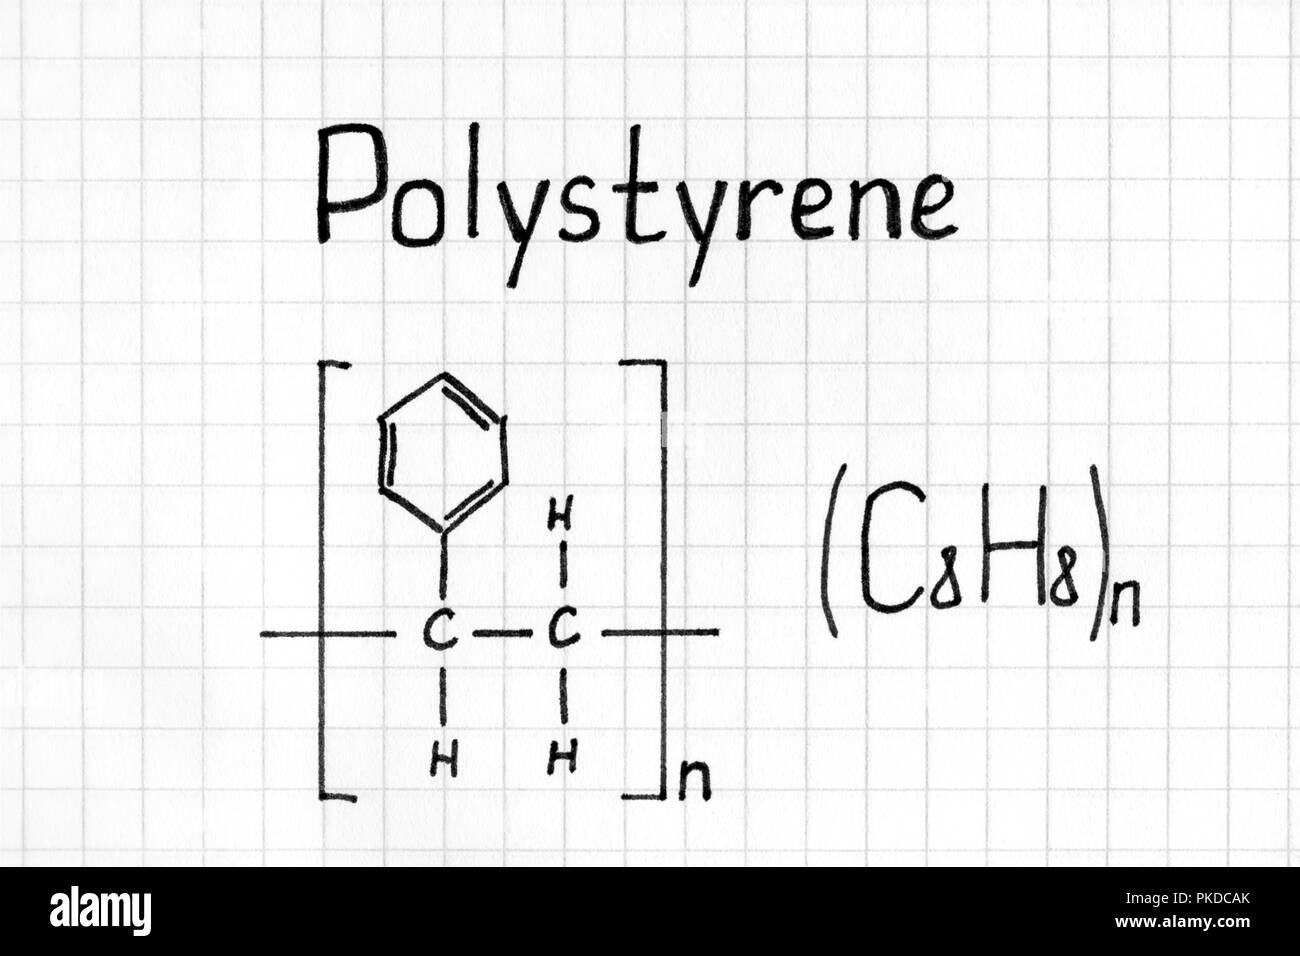 Polystyrene, Chemical Compound